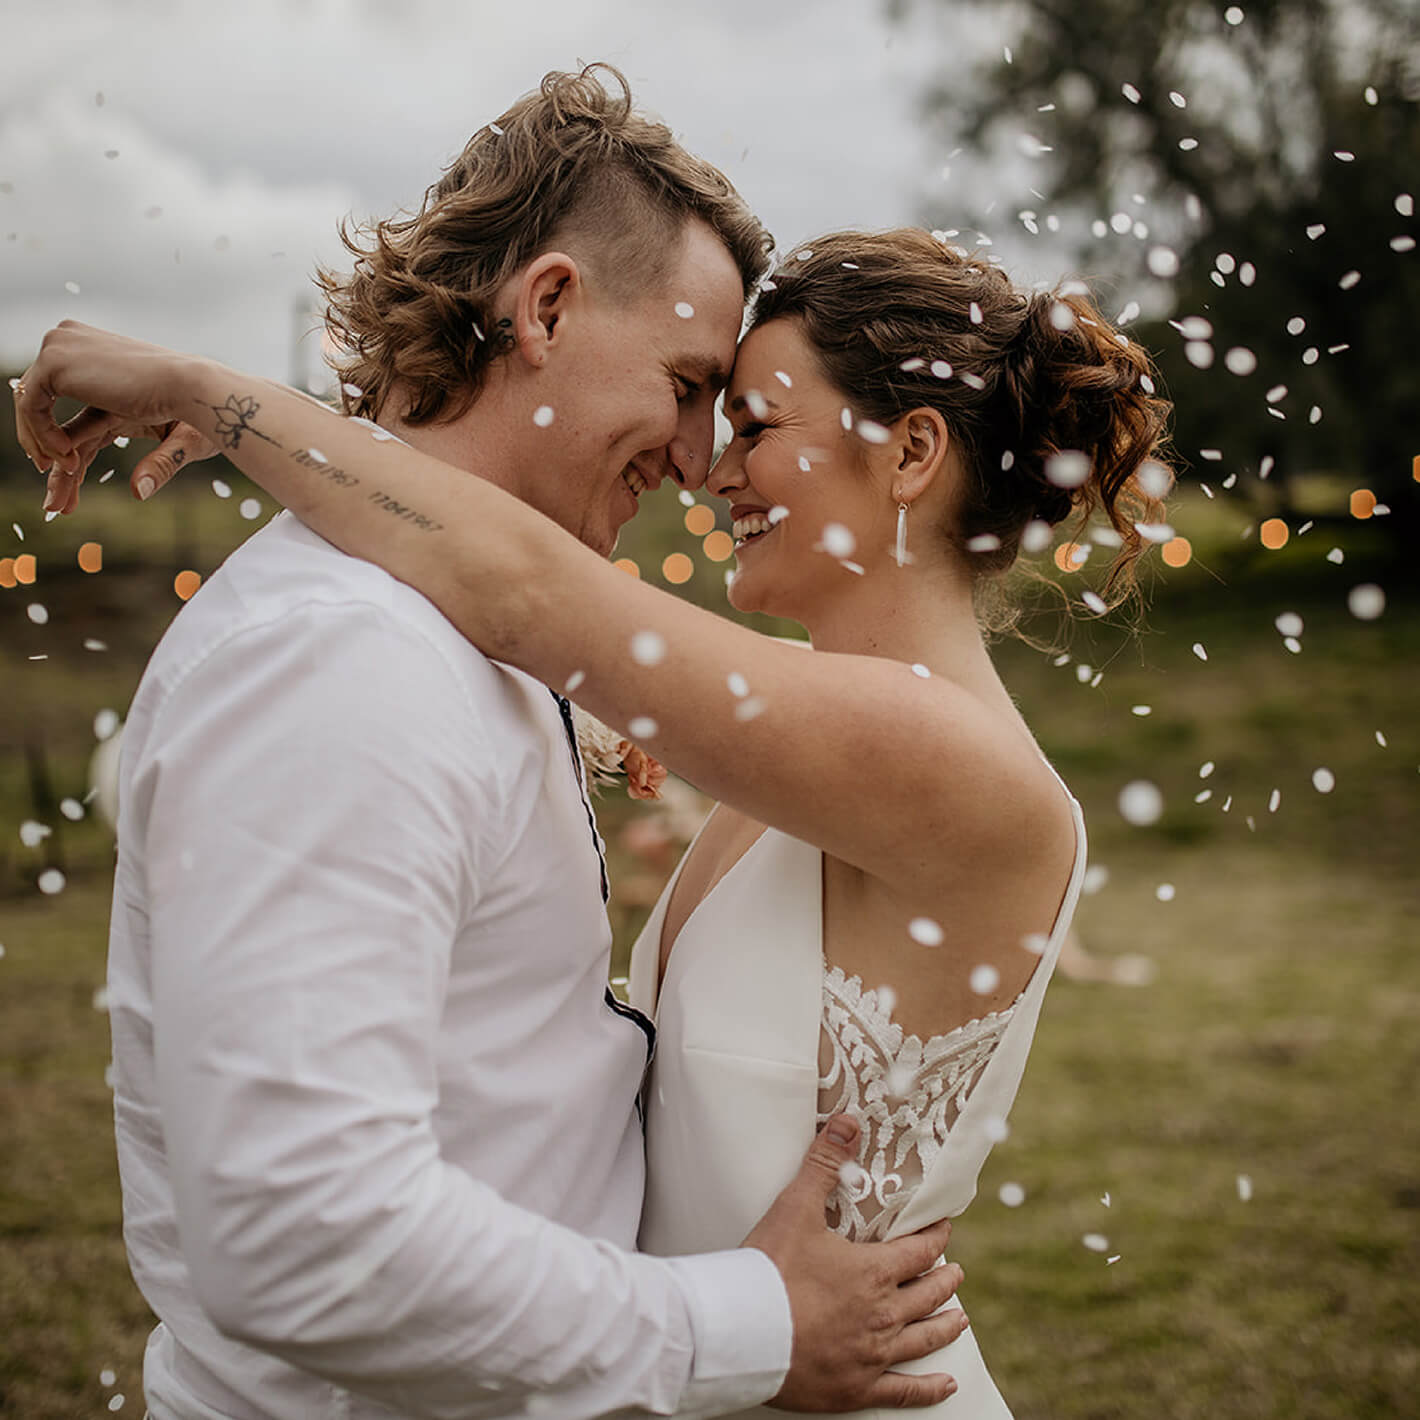 Rebranding case study image featuring brand photography for Eco Confetti. A country-styled couple stare into each other’s eyes, gold and white metallic confetti surrounding them.